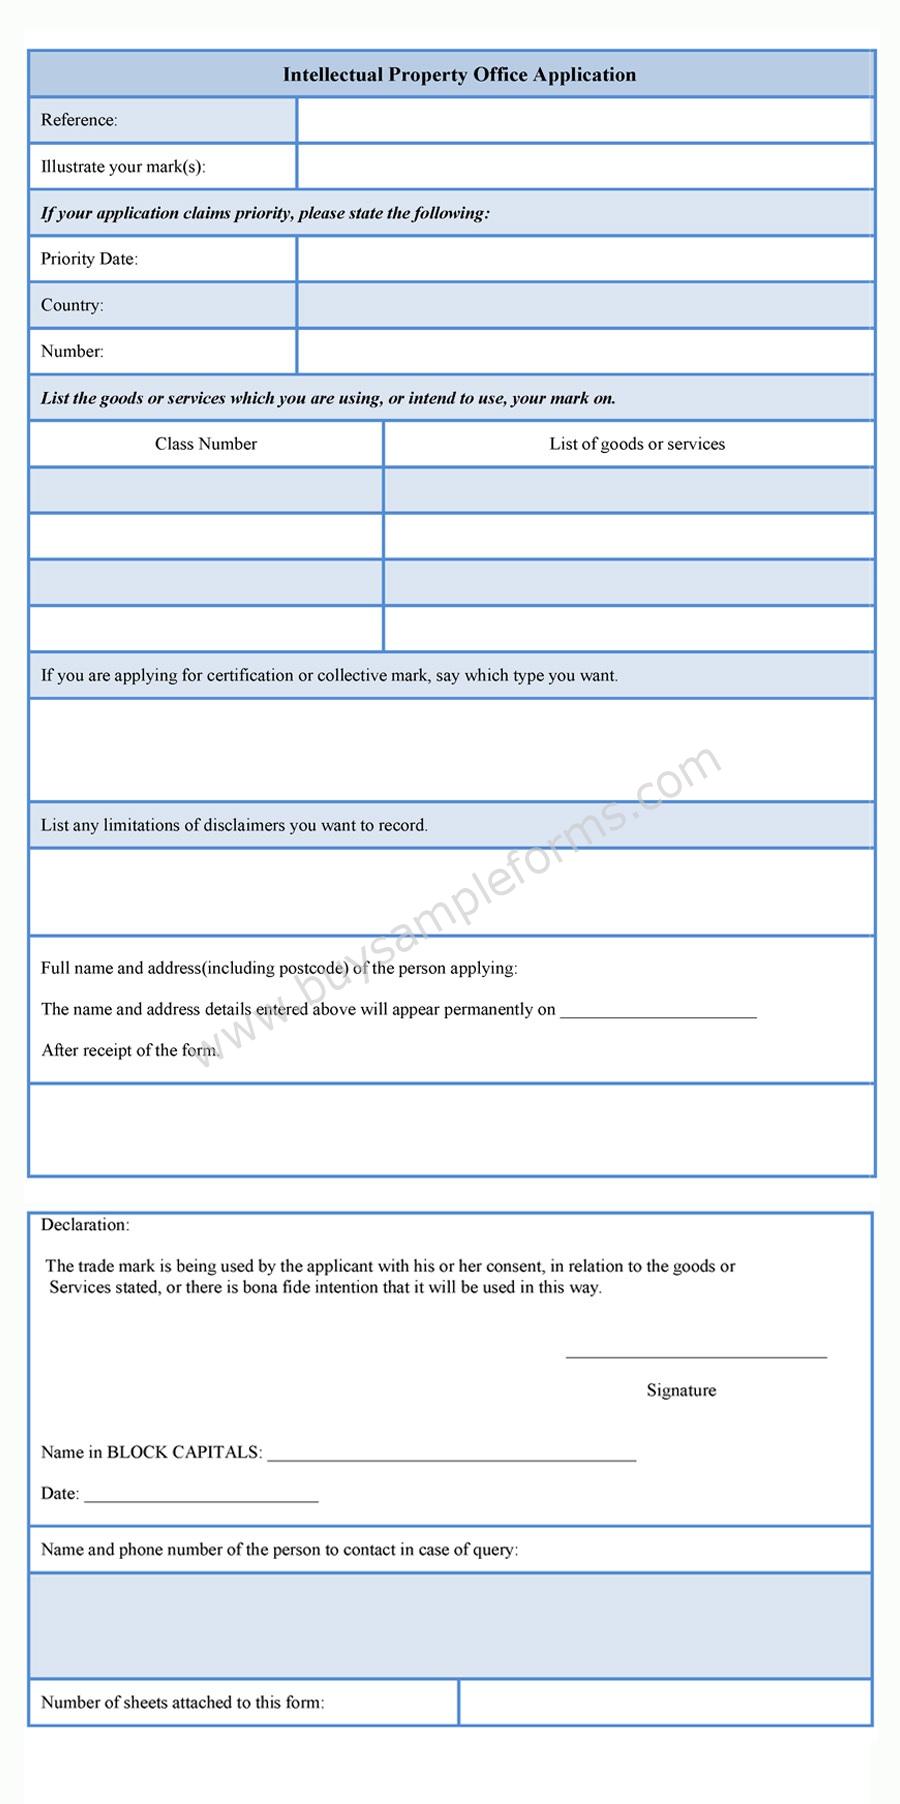 Intellectual Property Office Application Form